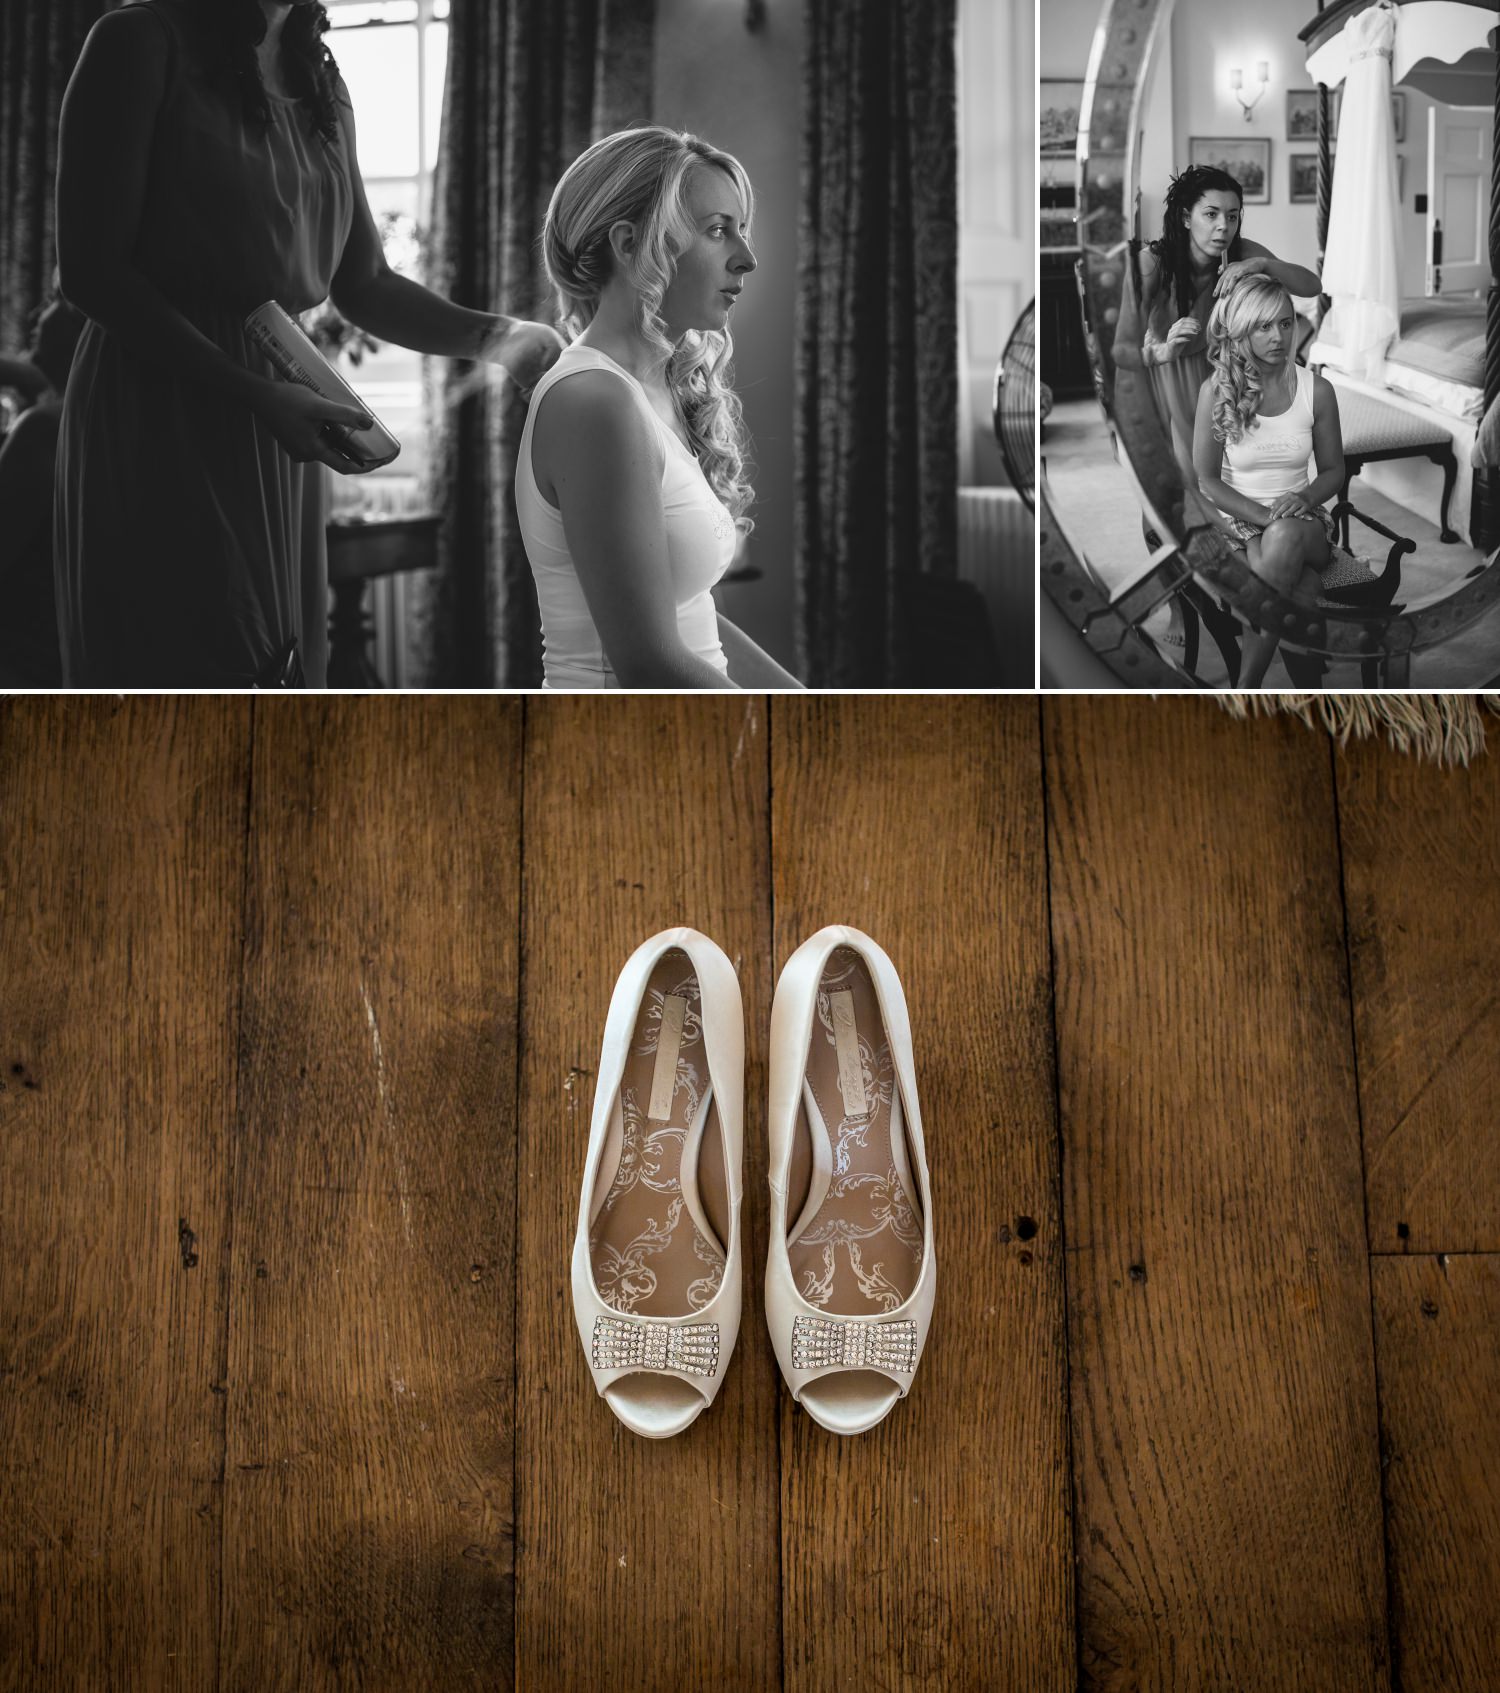 Wedding Photography of bride getting ready at Iscoyd Park, Wrexham